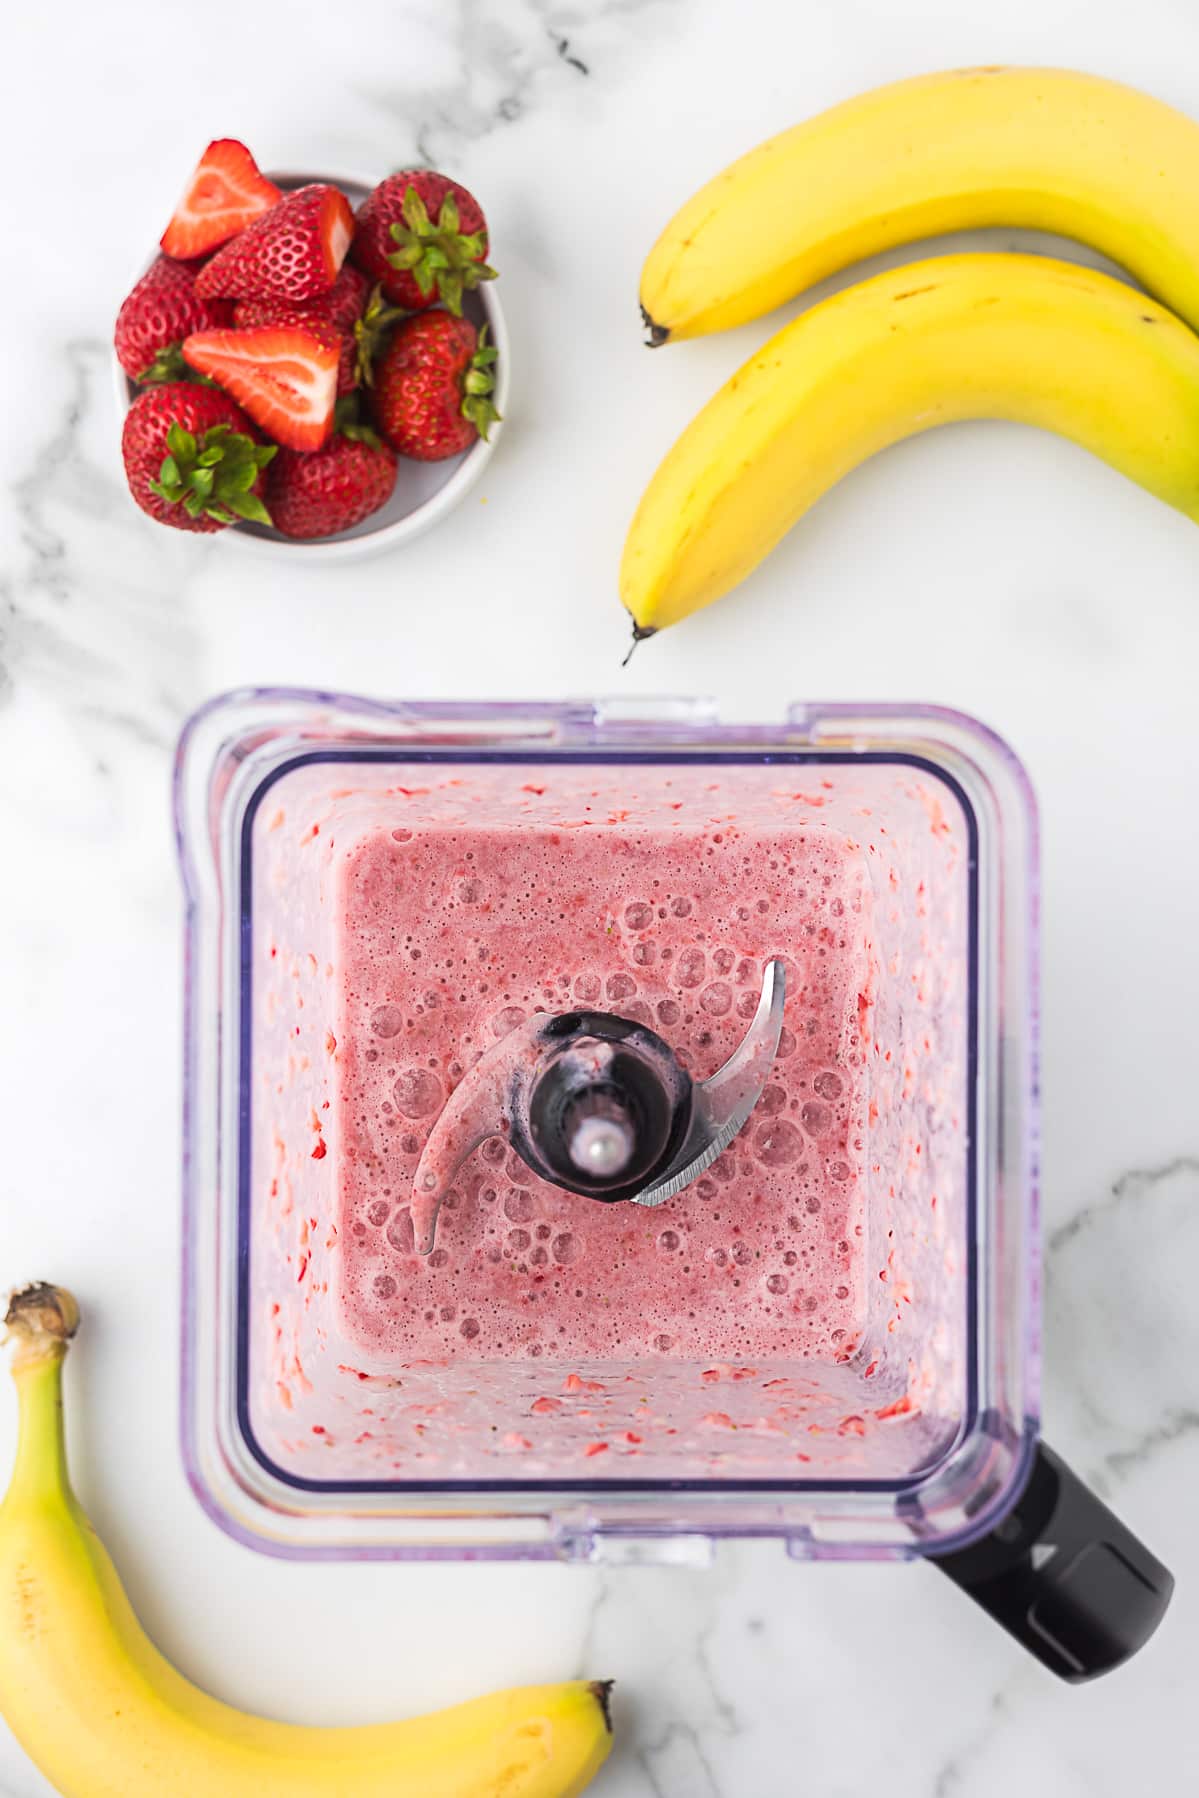 Strawberries, banana and milk after blending to make a strawberry banana smoothie without yogurt.